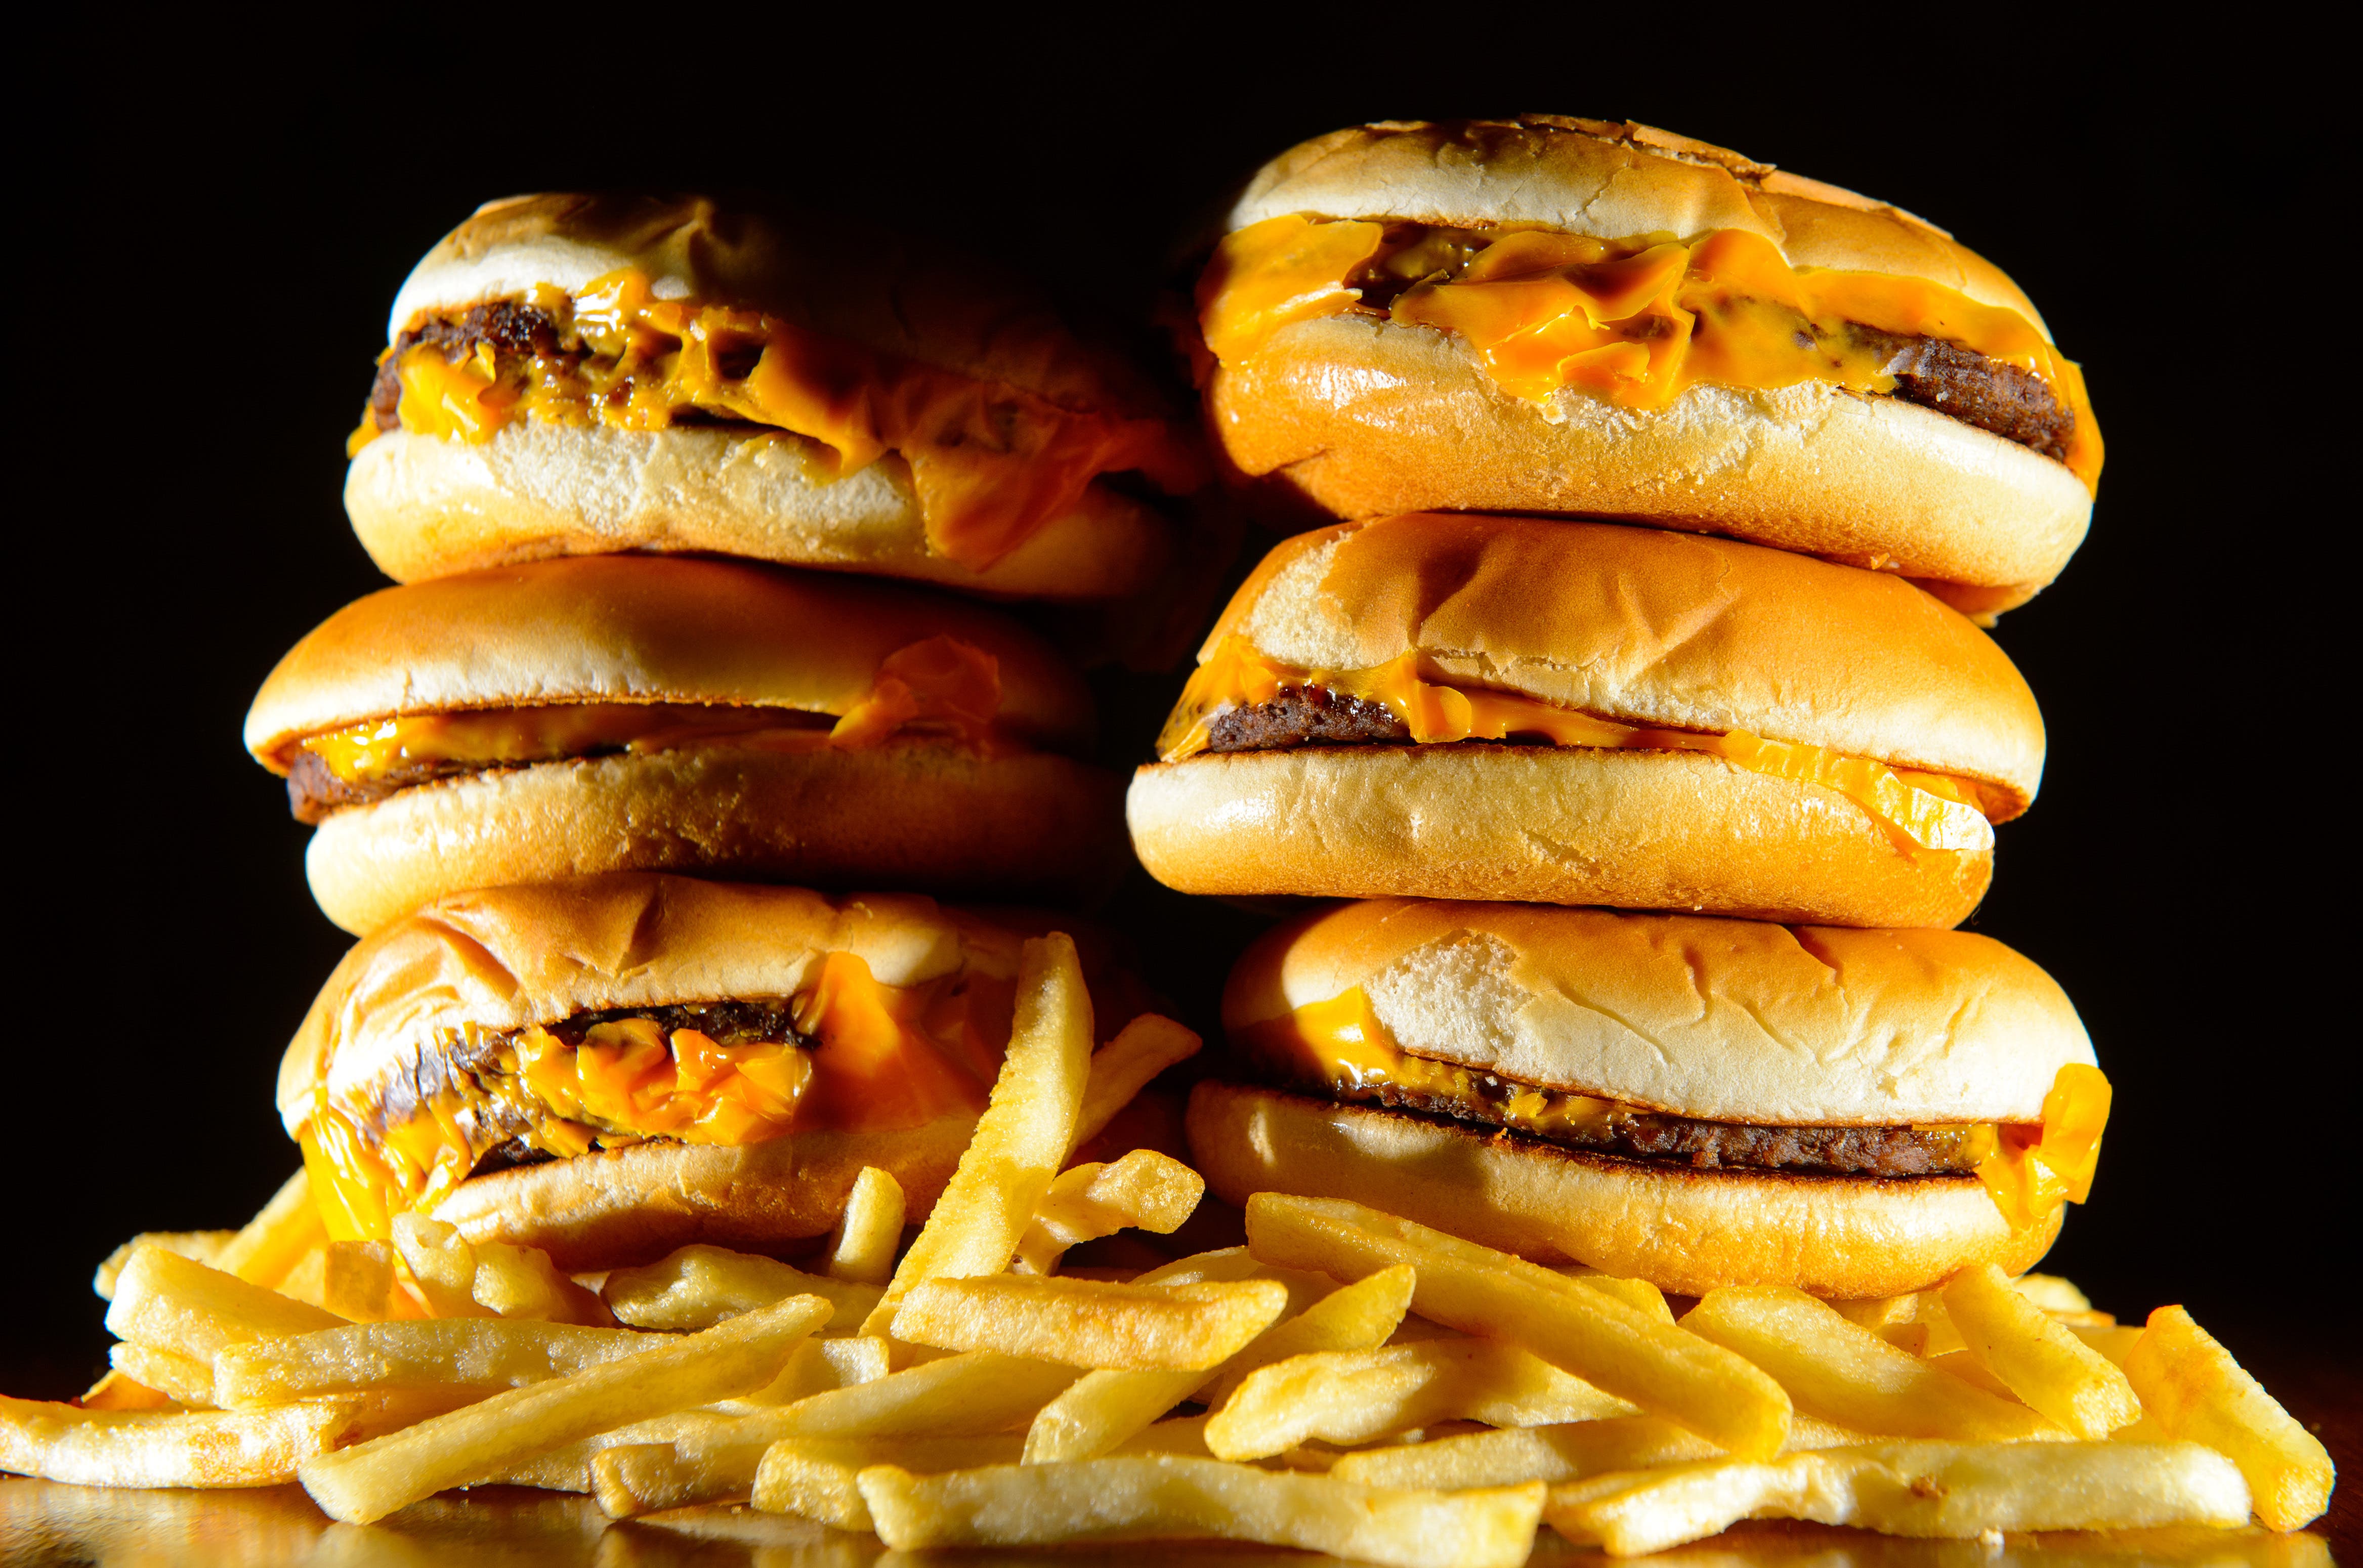 The banning junk food adverts on transport in London averted 95,000 cases of obesity, study finds -responsive i-amphtml -layout-size-defined